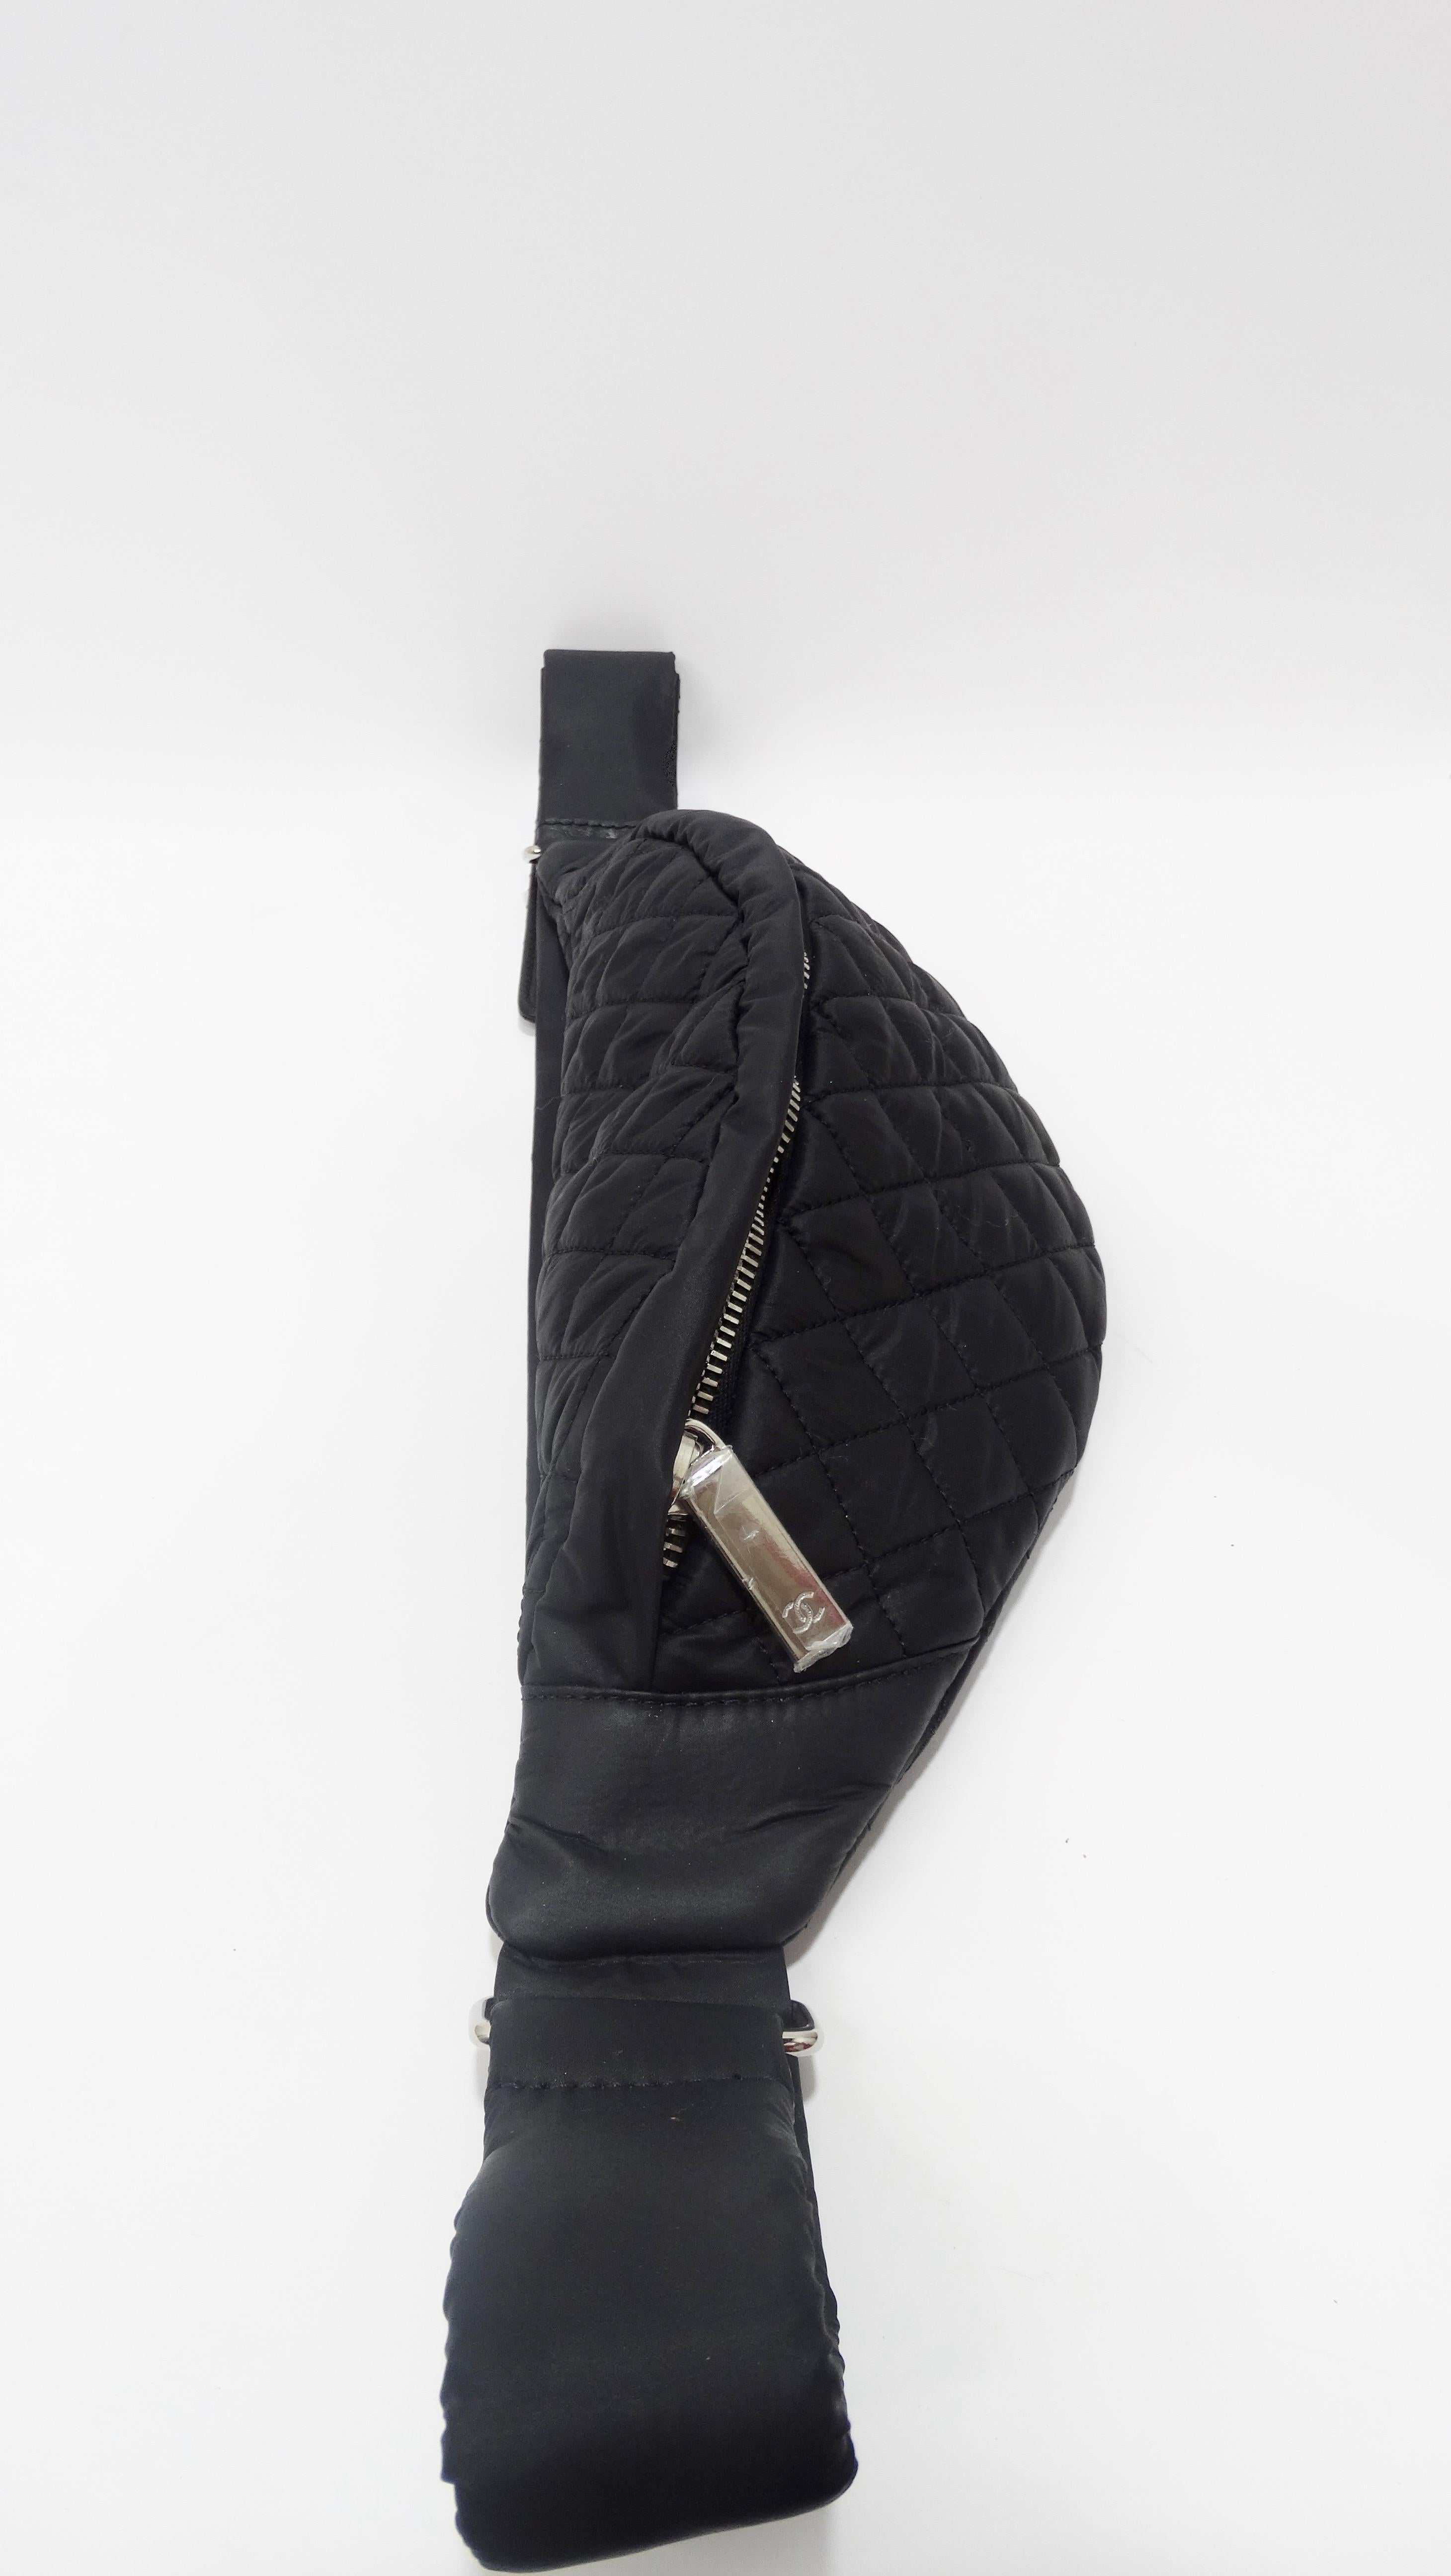 From traveling to running around, your new favorite fanny pack is here! Circa 2014/1025 this stylish Chanel fanny is crafted from black nylon and features Chanel's signature quilted stitching, a nylon and leather adjustable waist belt, and silver